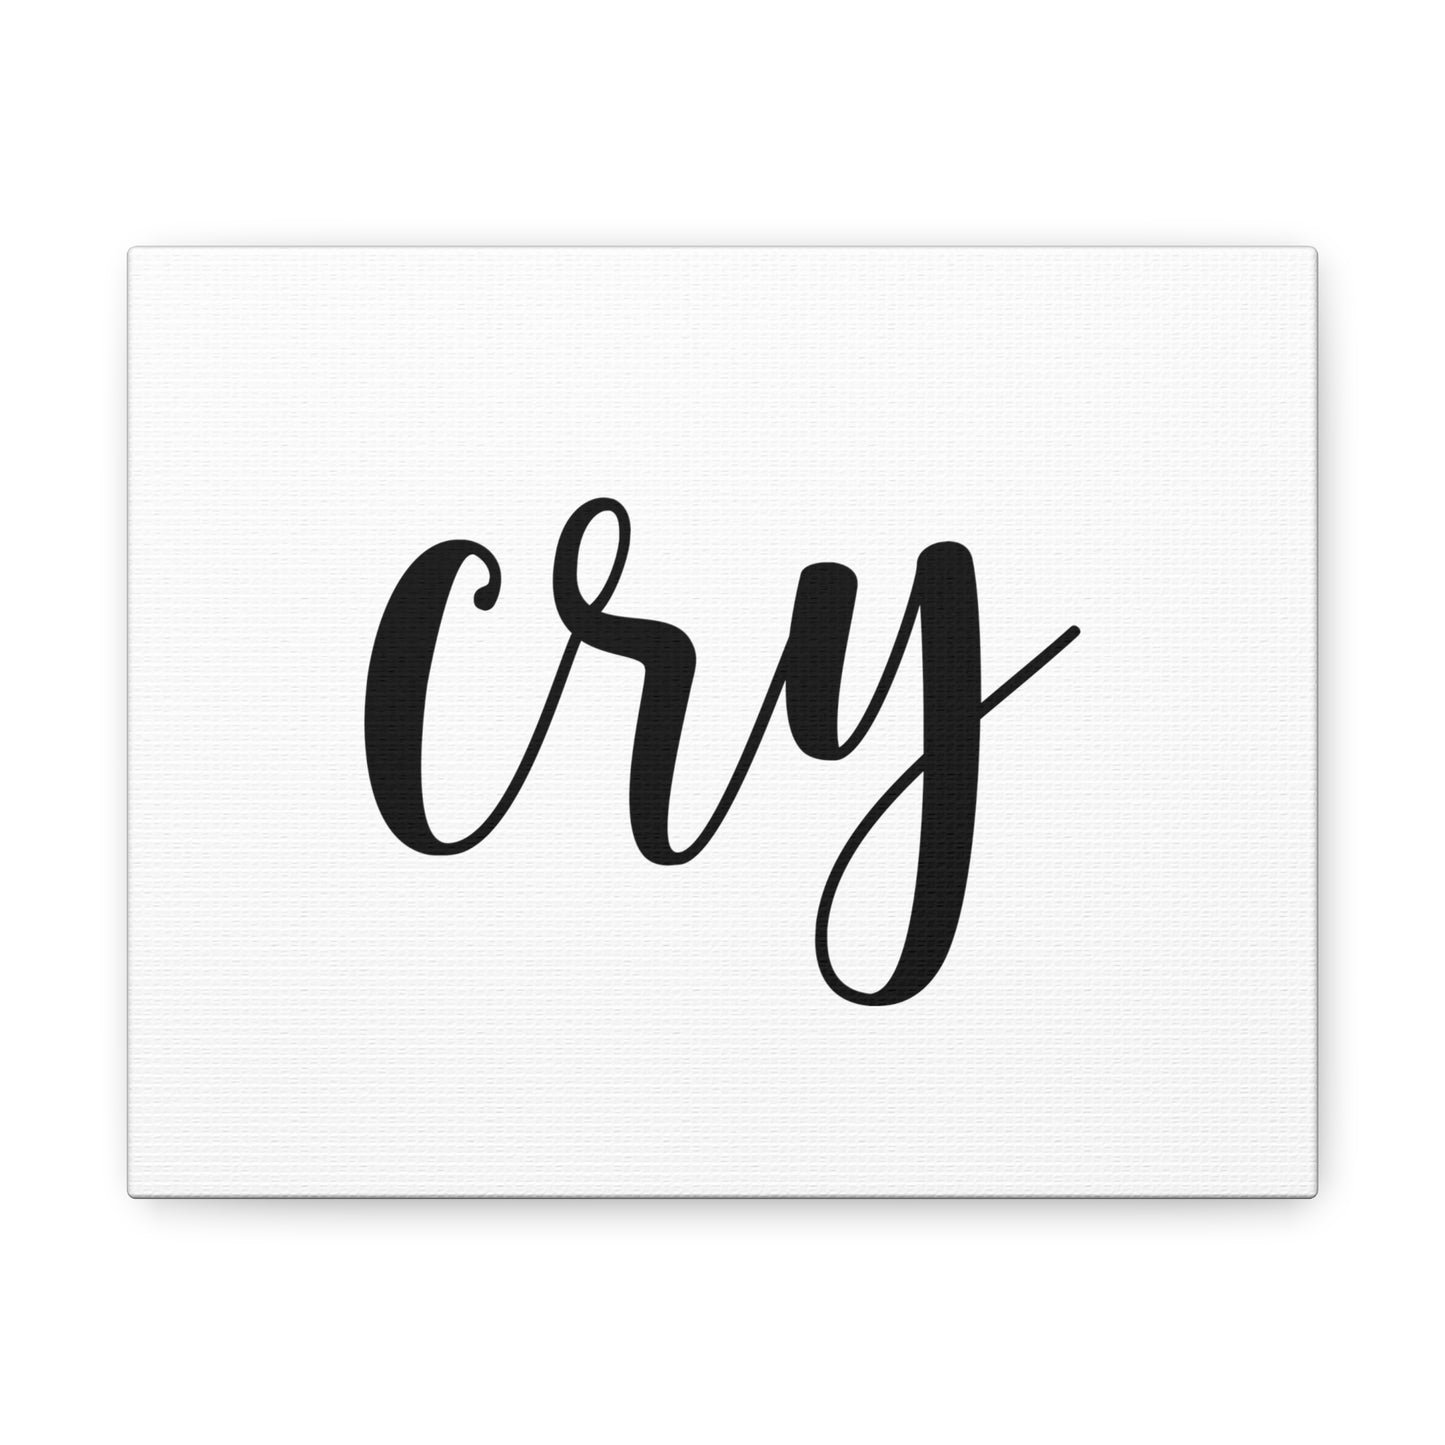 "Cry" Gallery Wrap. (anti-Live Laugh Love)